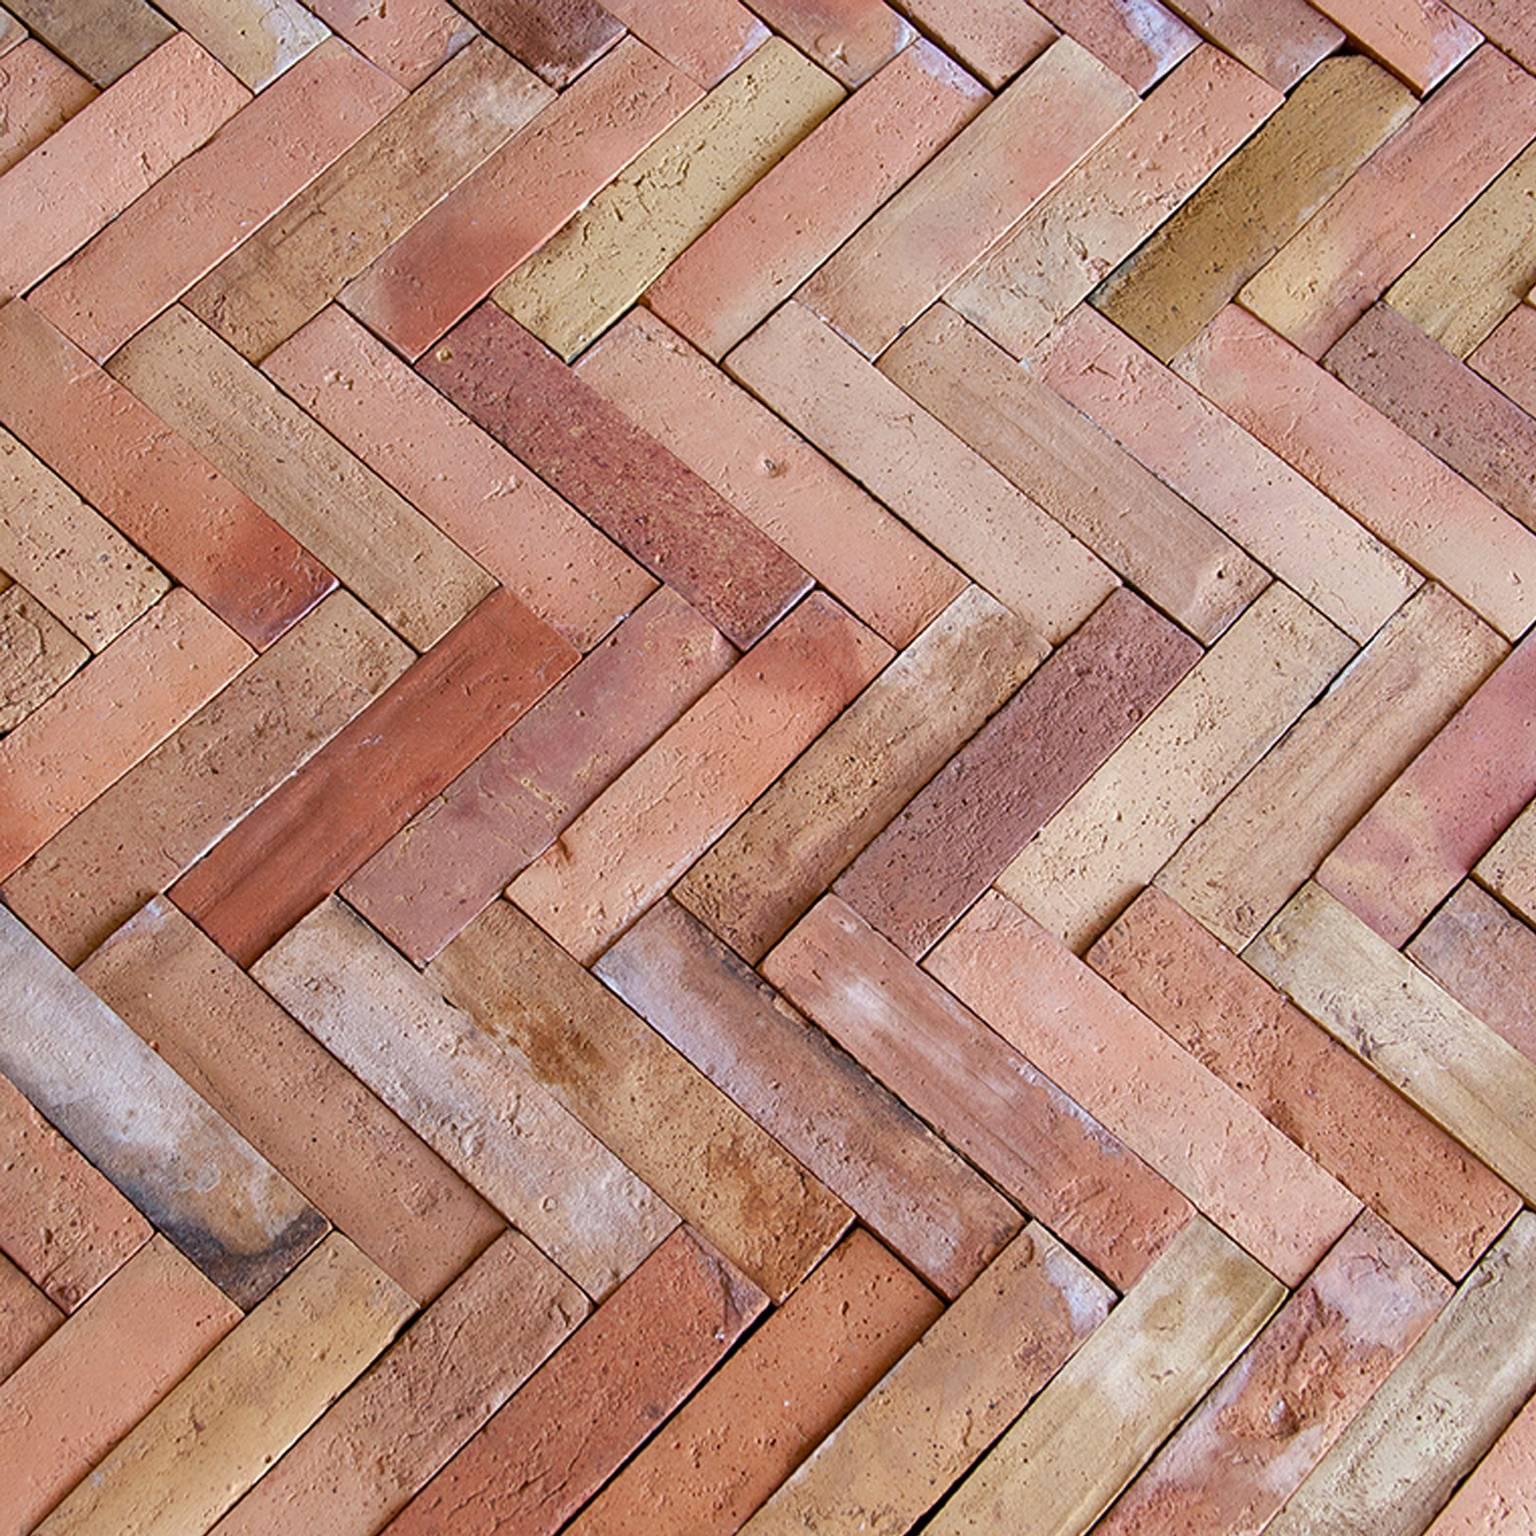 French reclaimed Terra Cotta bricks, over 100 years old. Each lot of these antique Terra Cotta tiles vary in size, color, and patina. Lot of 1000 sf at $23.00 sf in stock for immediate delivery.

